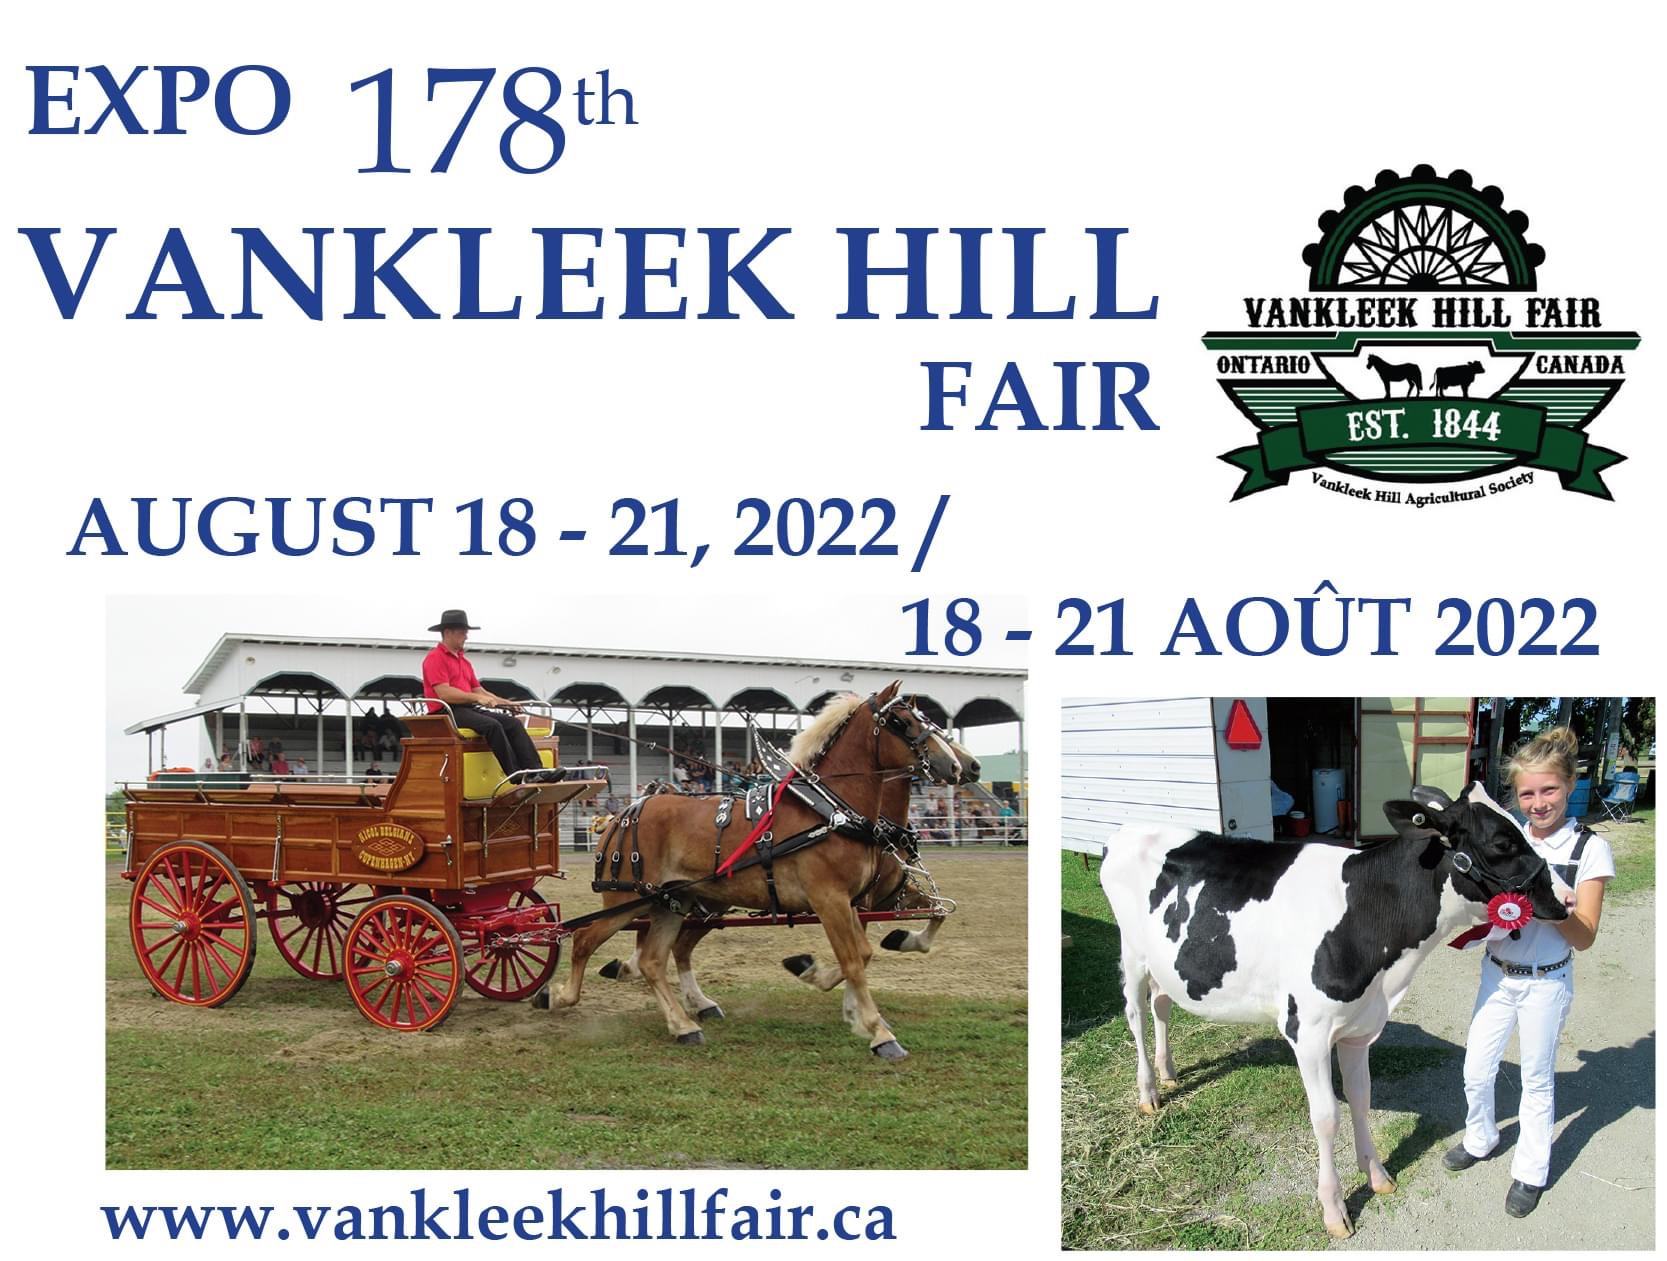 The 178th Annual Vankleek Hill Fair The Review Newspaper